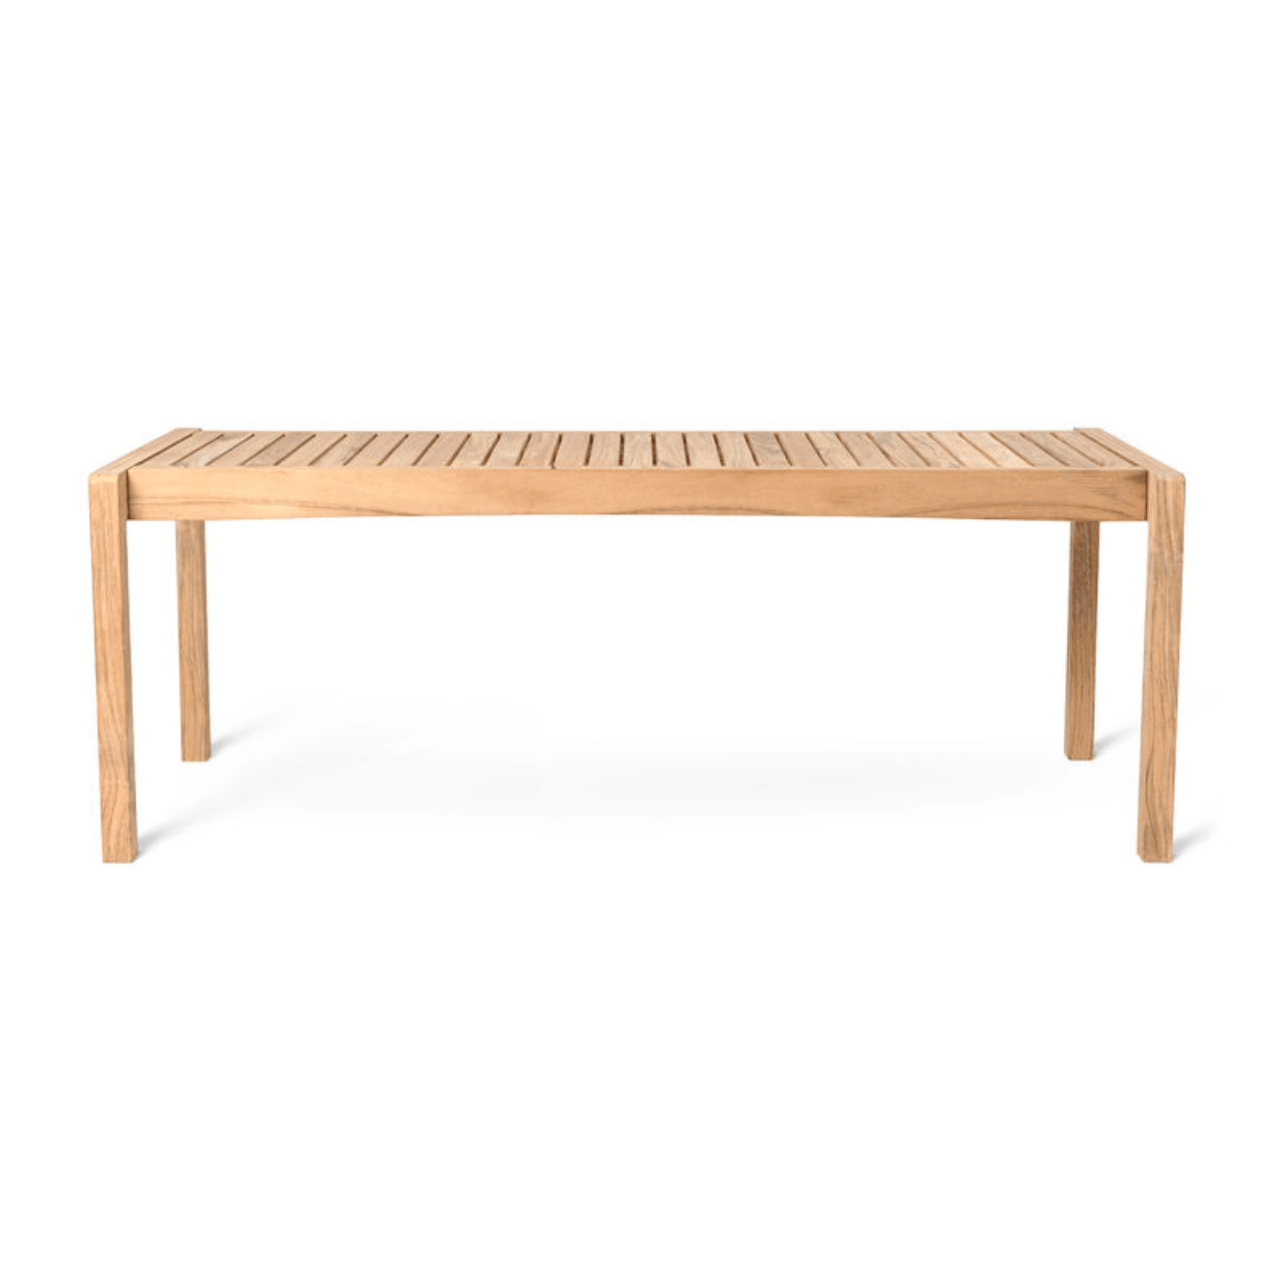 ALFRED Outdoor Table Bench